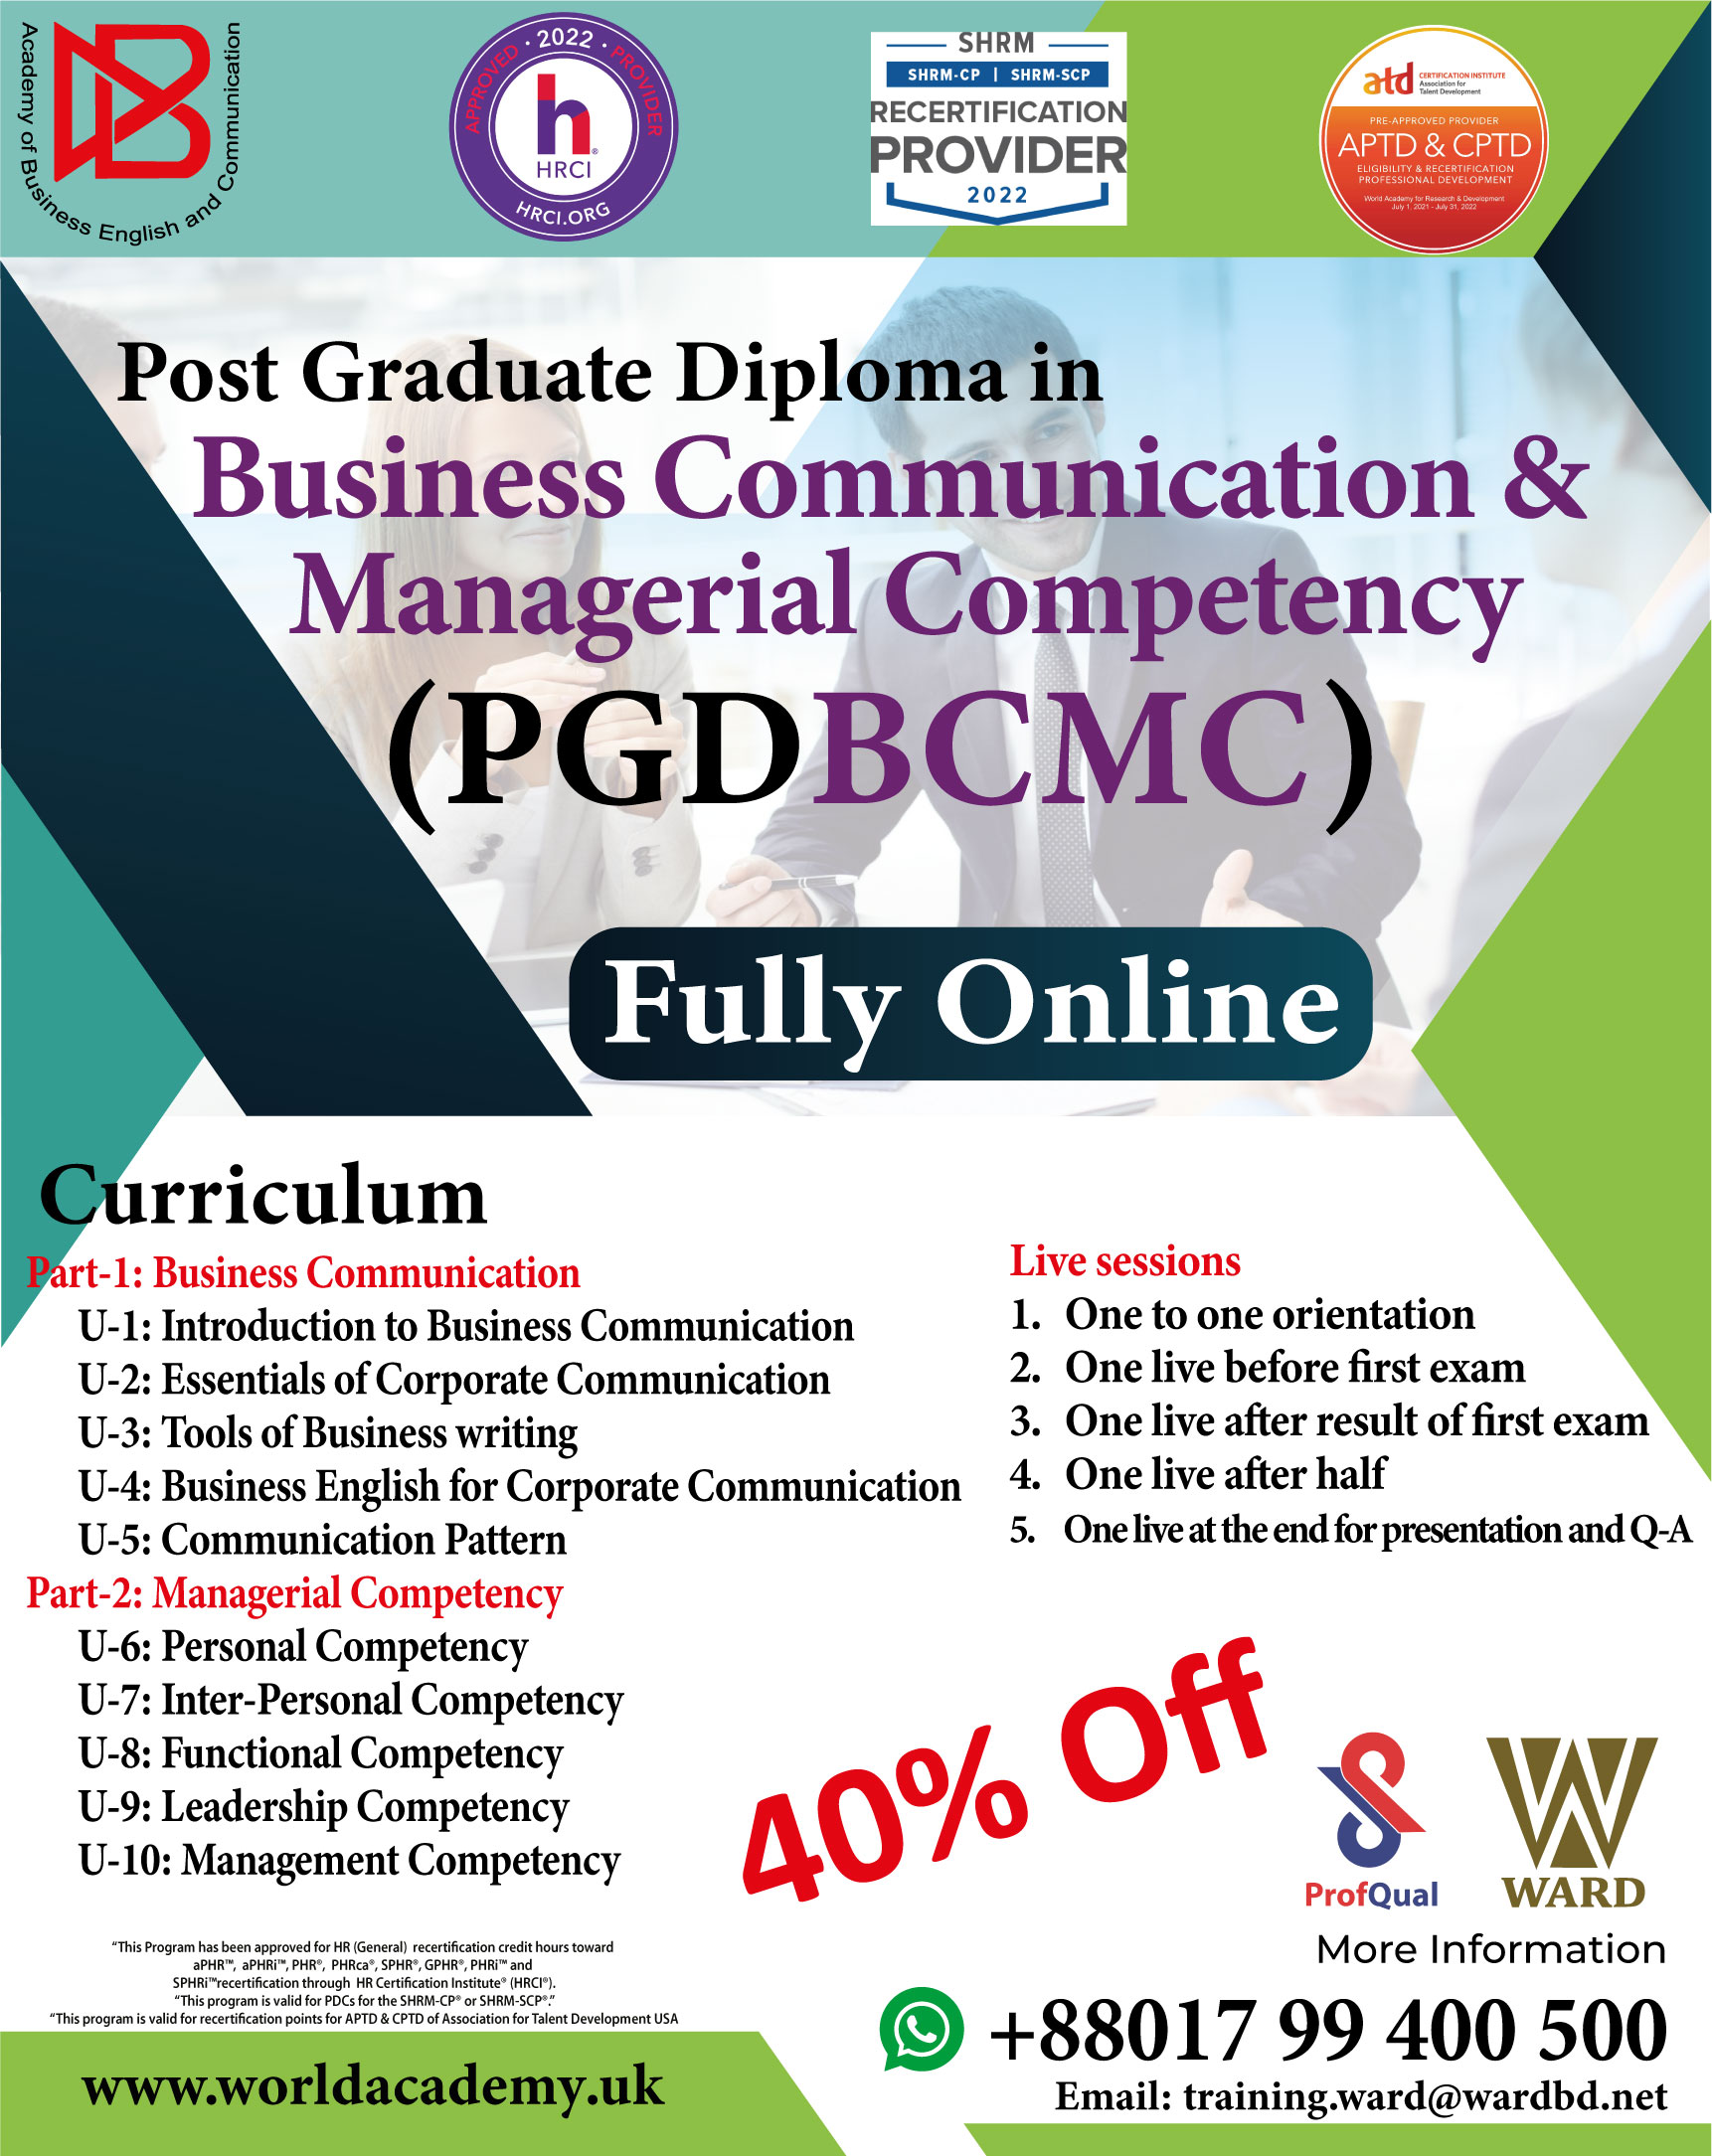 Post Graduate Diploma in Business Communication & Managerial Competency [PGDBCMC] - Fully Online